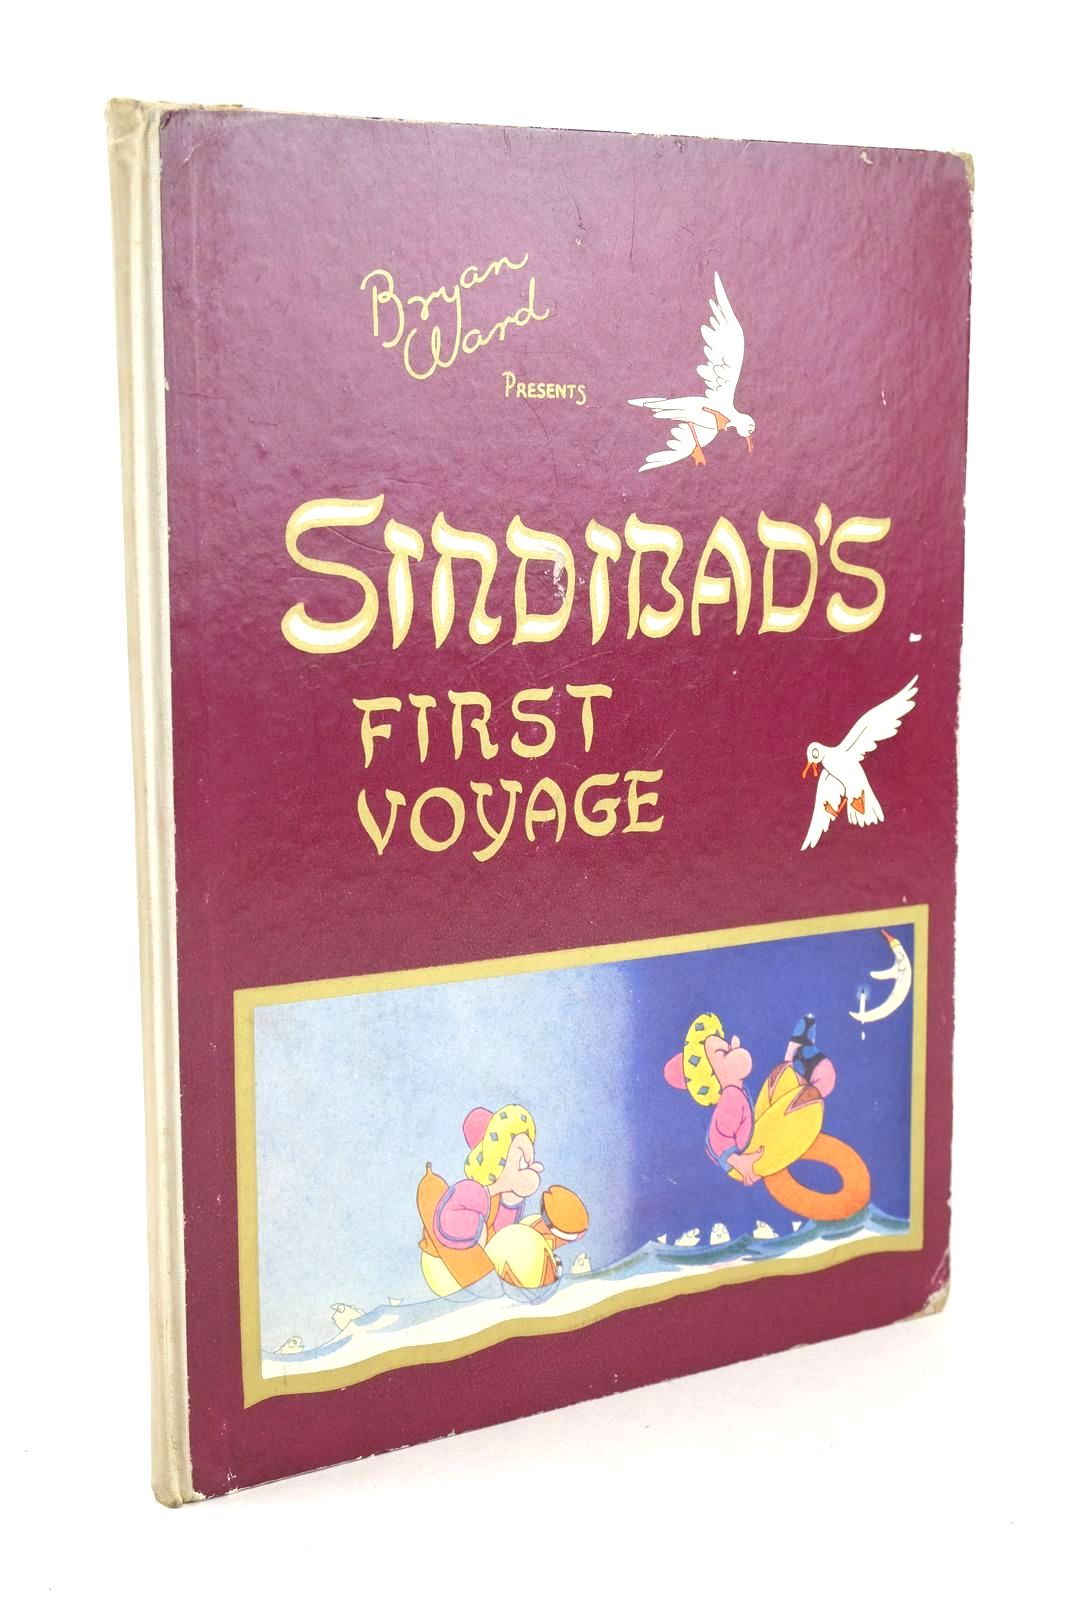 Photo of SINDIBAD'S FIRST VOYAGE written by Ward, Bryan illustrated by Ward, Bryan published by Edmund Ward (STOCK CODE: 1326310)  for sale by Stella & Rose's Books